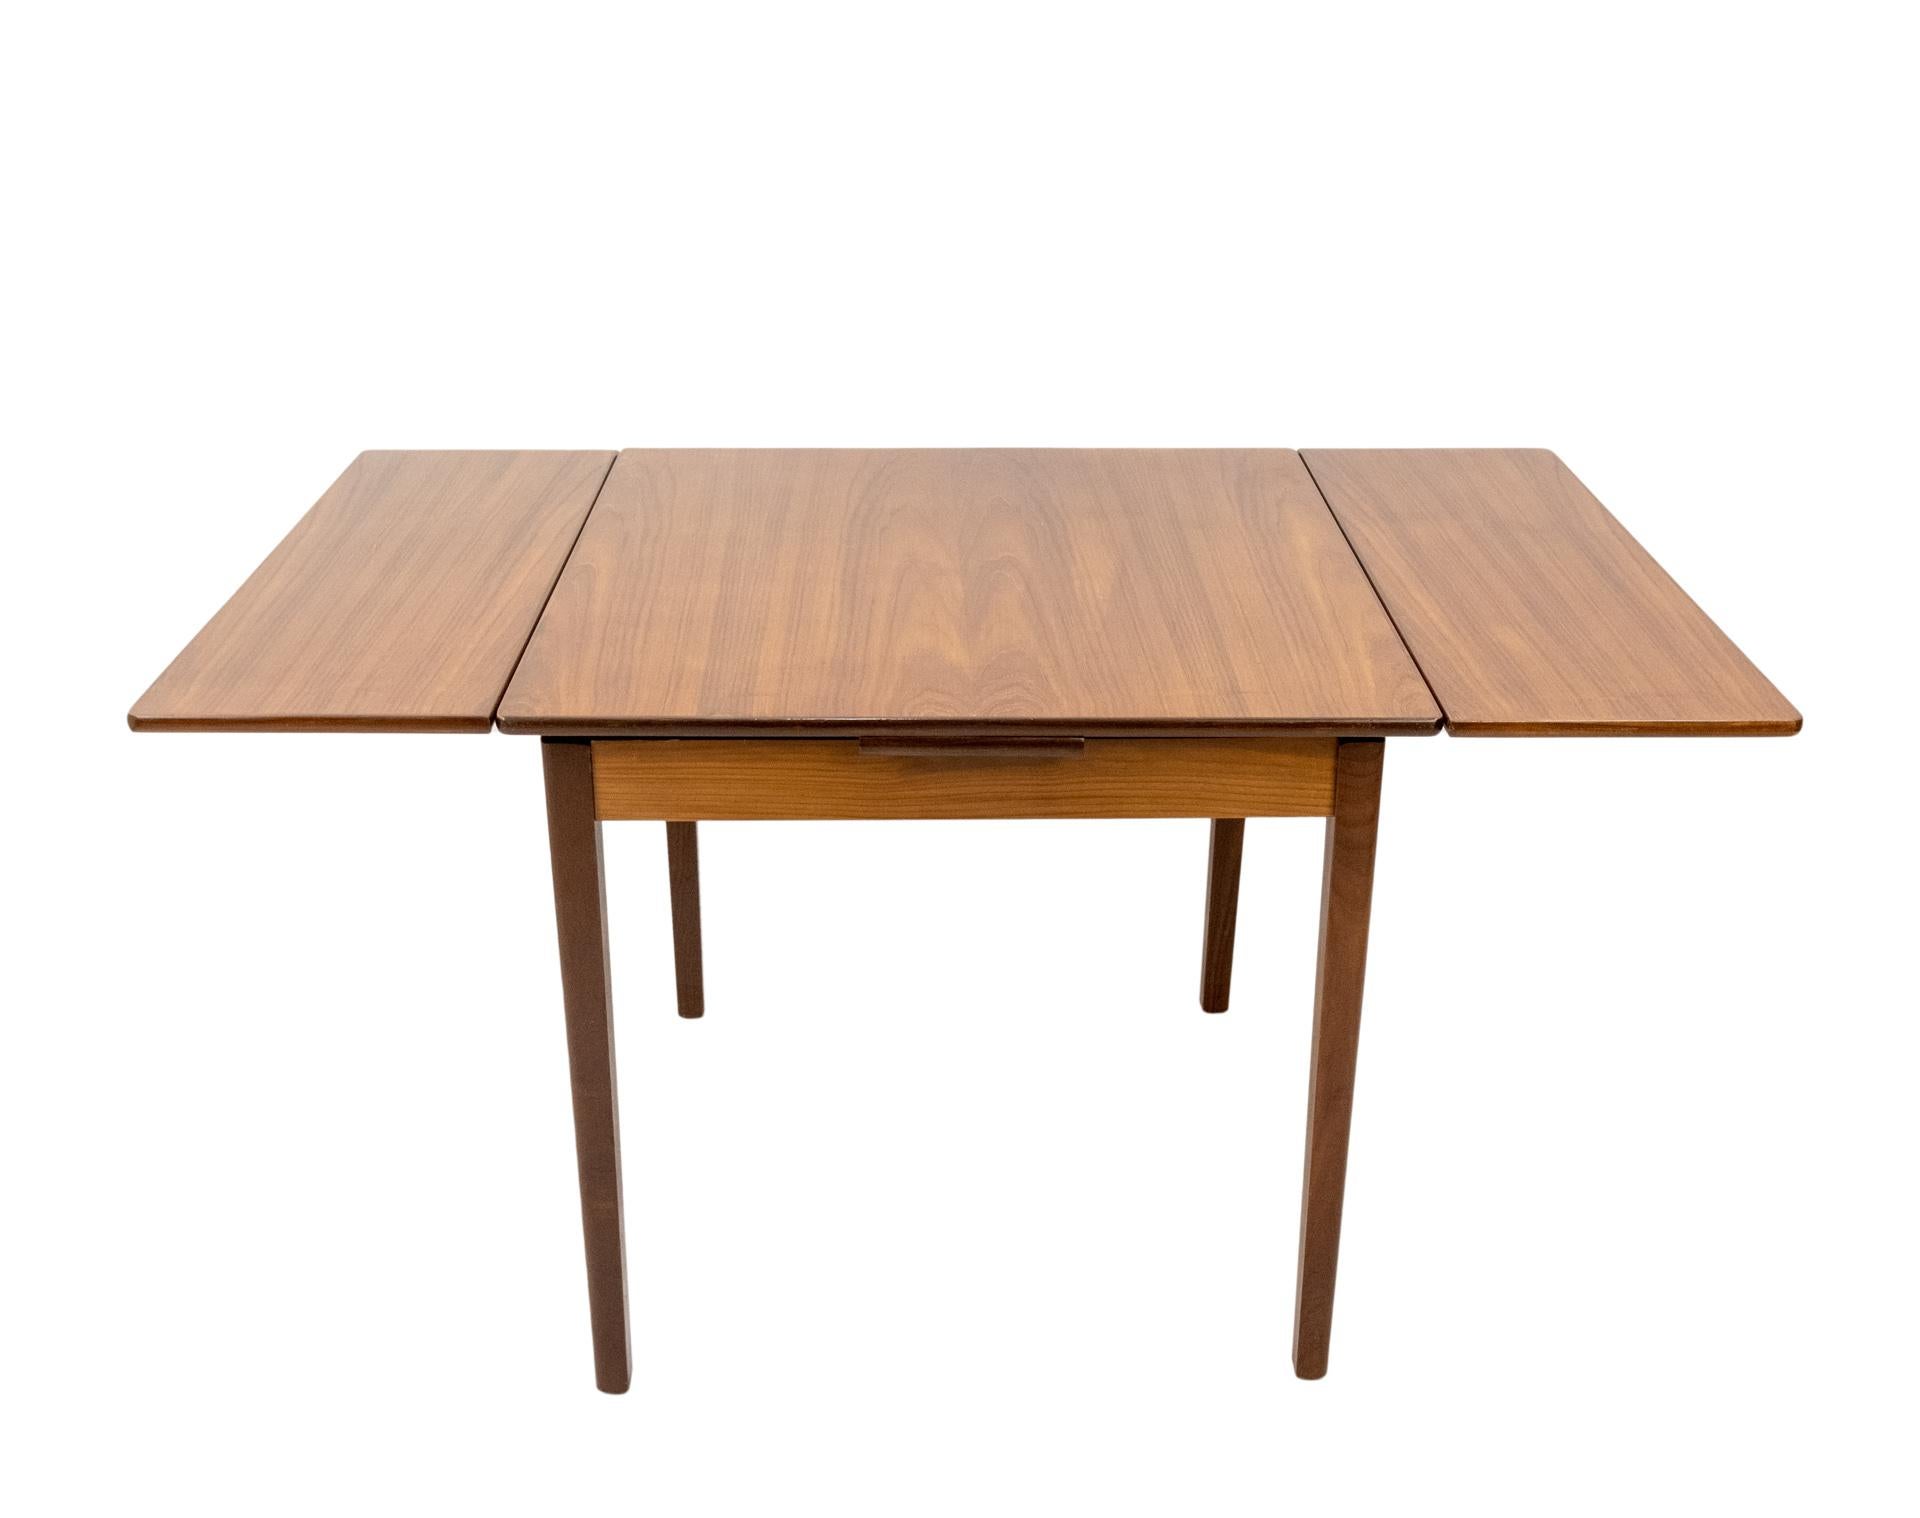 Very nice small extendable dining table in teak. Designed by Cees Braakman and manufactured by Pastoe.
1950s, Holland. This was the first dining table designed to be easily disassembled and packed flat so it could be sold by post-order.
Measures: